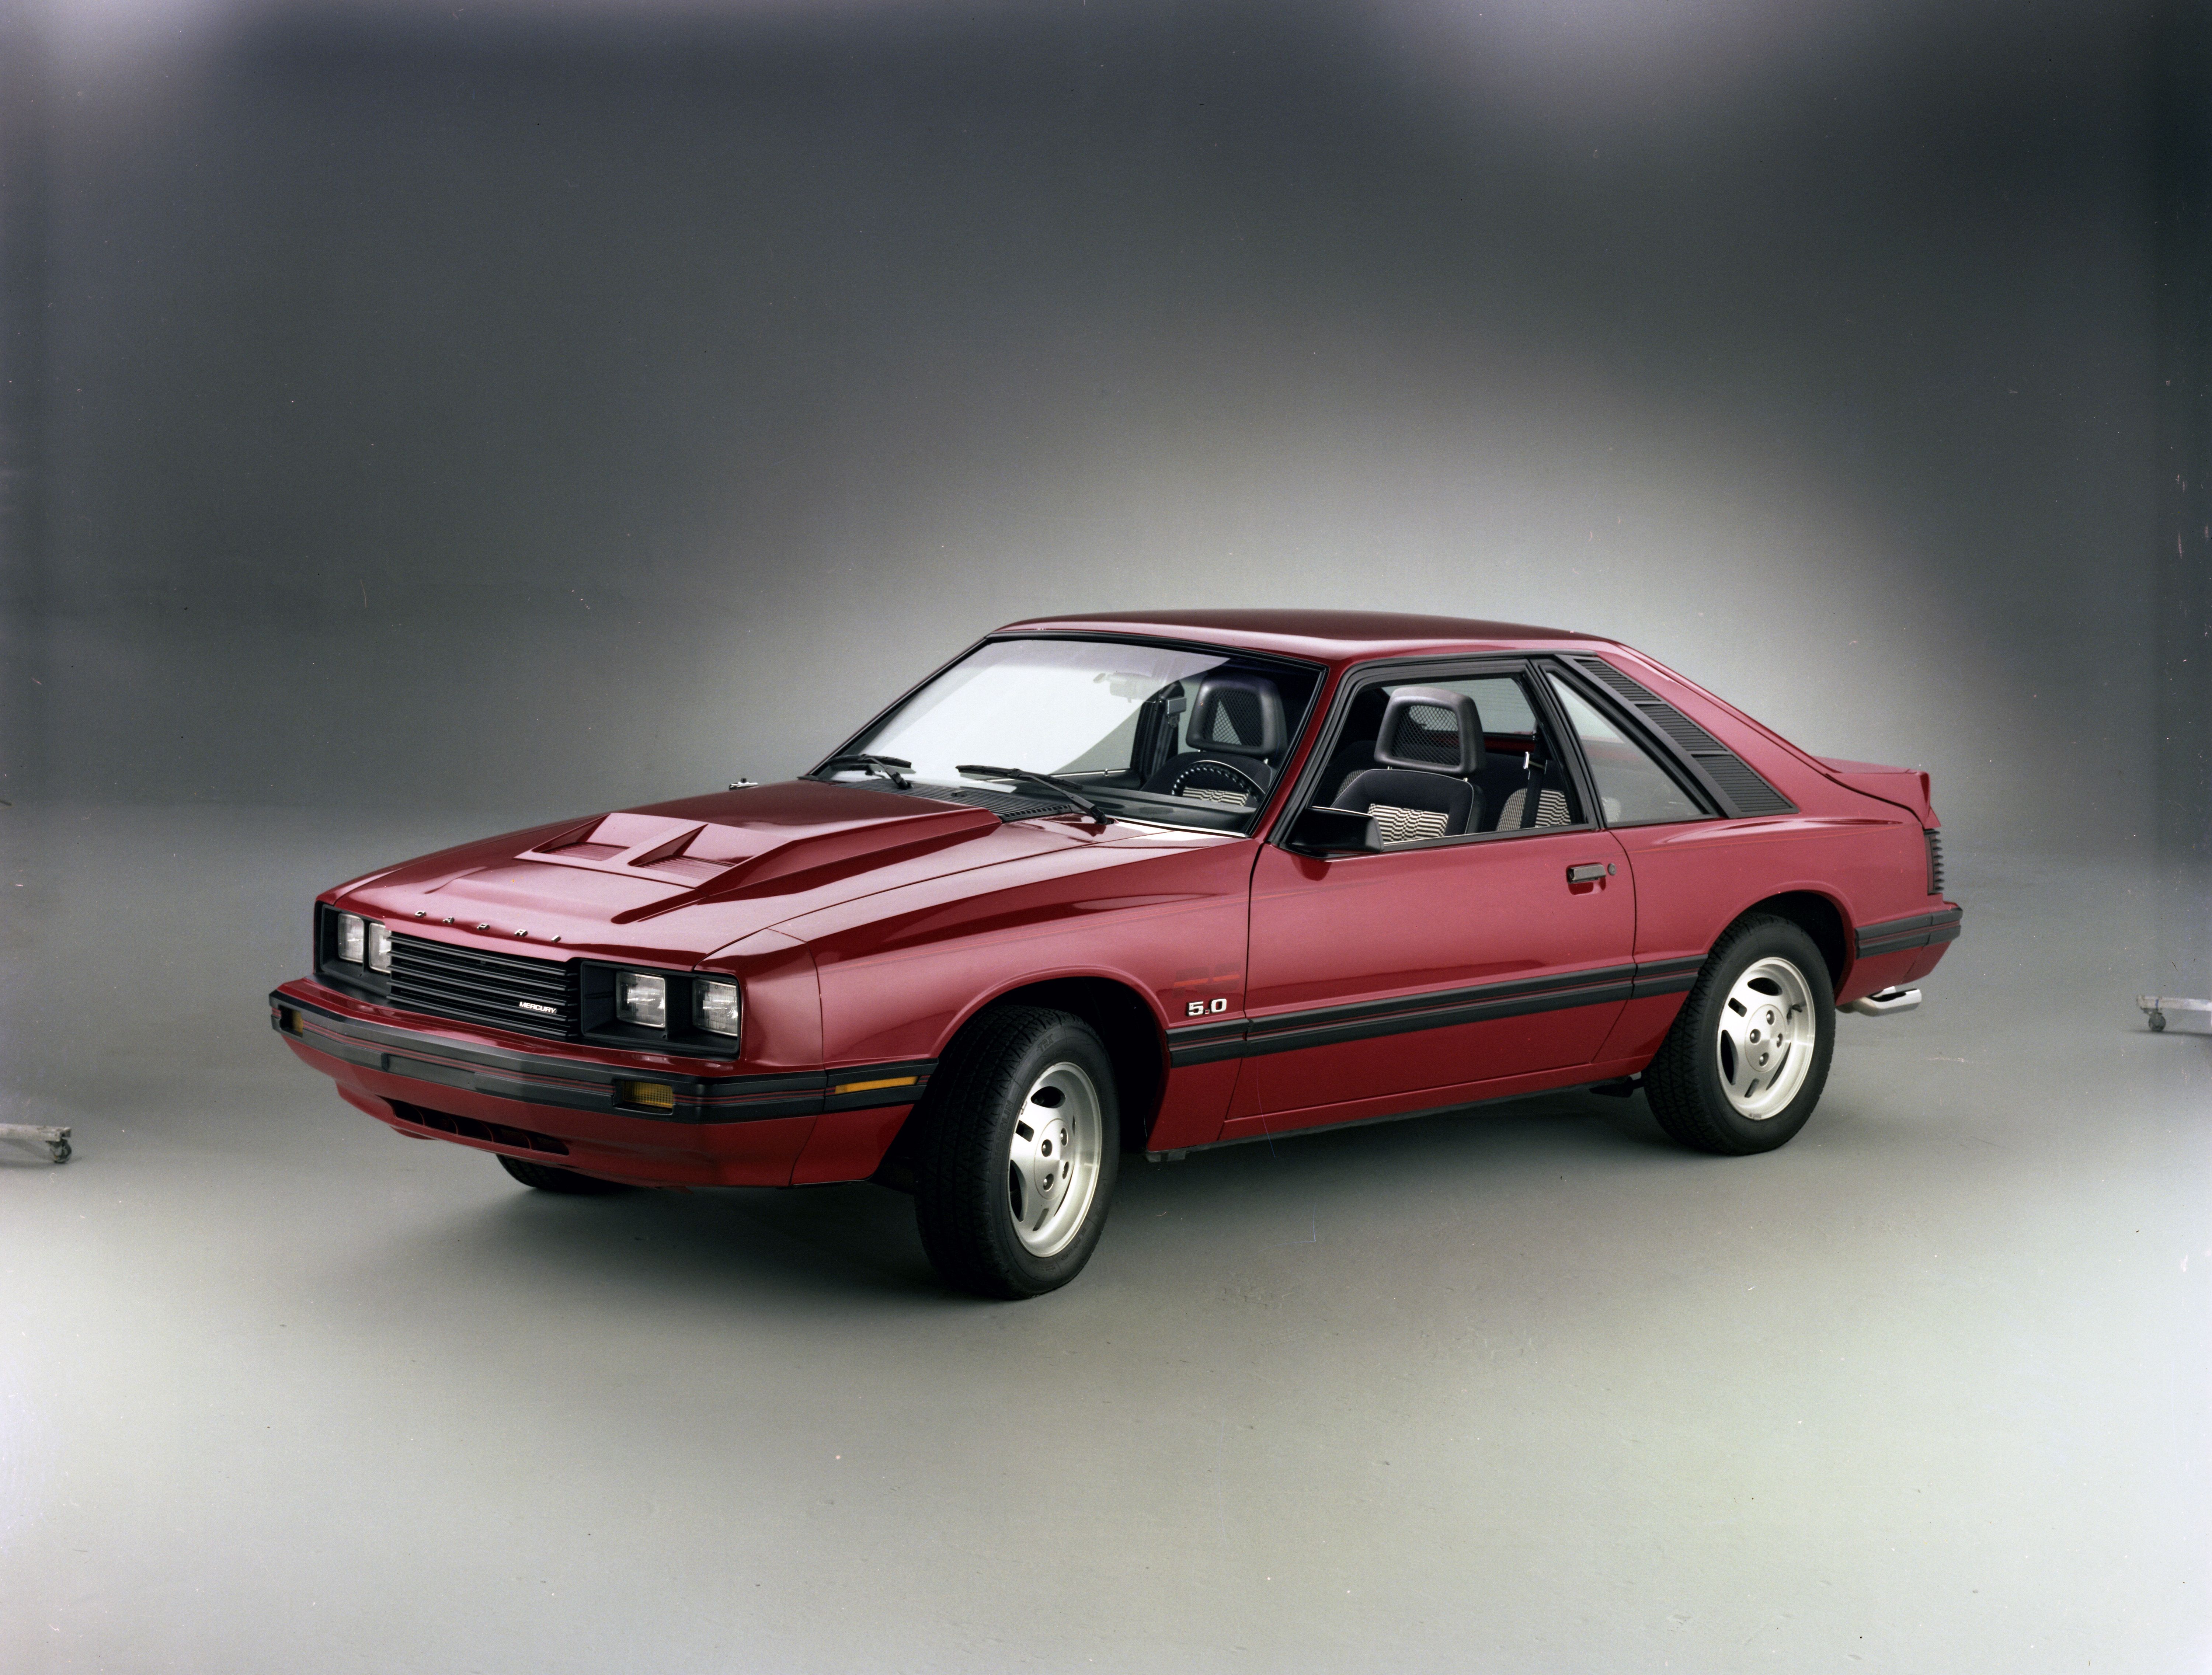 Ford Capri - The European Pony Car That Came Before the Mustang